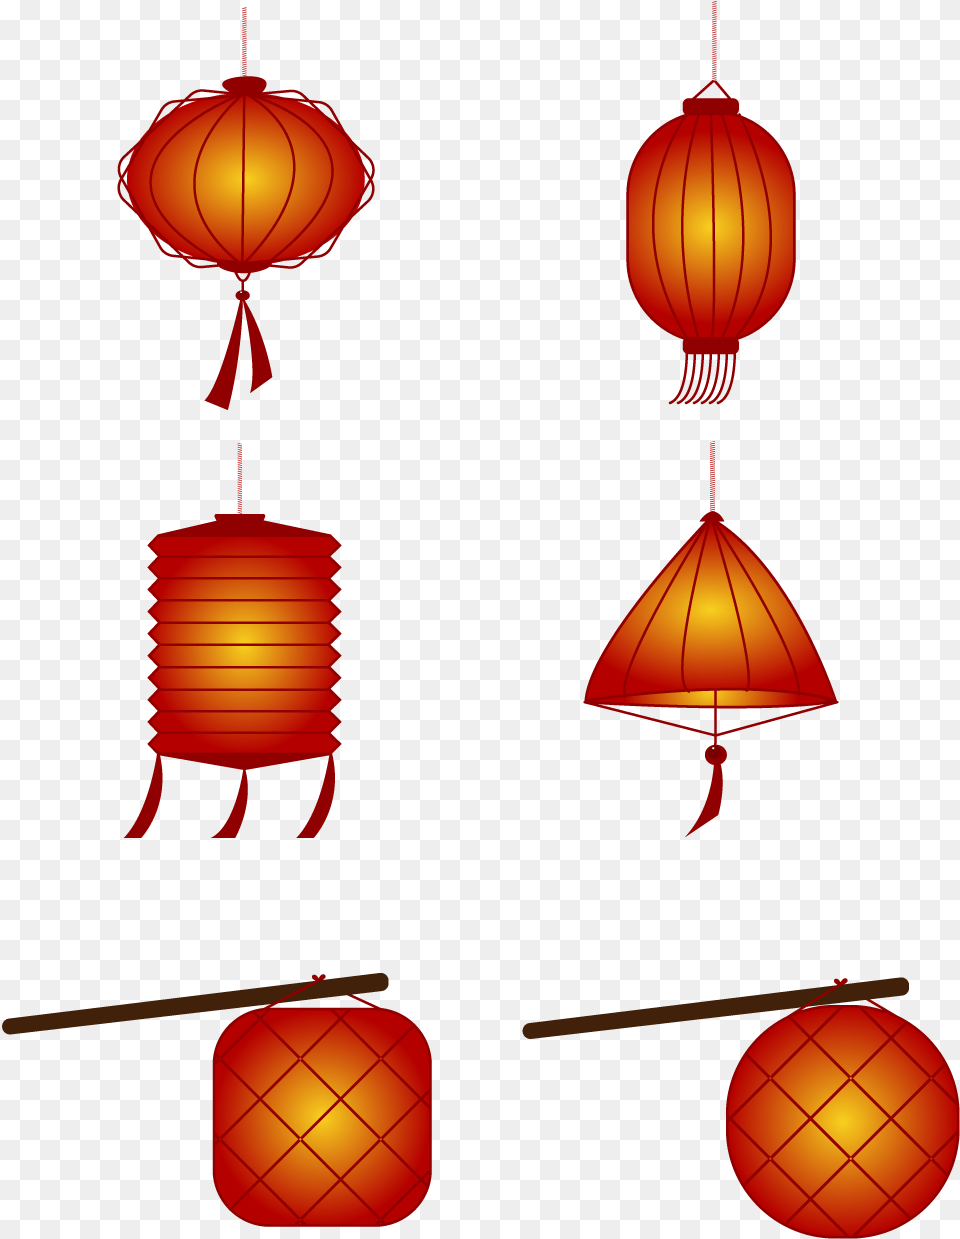 Lantern Red New Year Festive And Vector Image Paper Lantern, Lamp, Lampshade, Lighting Png